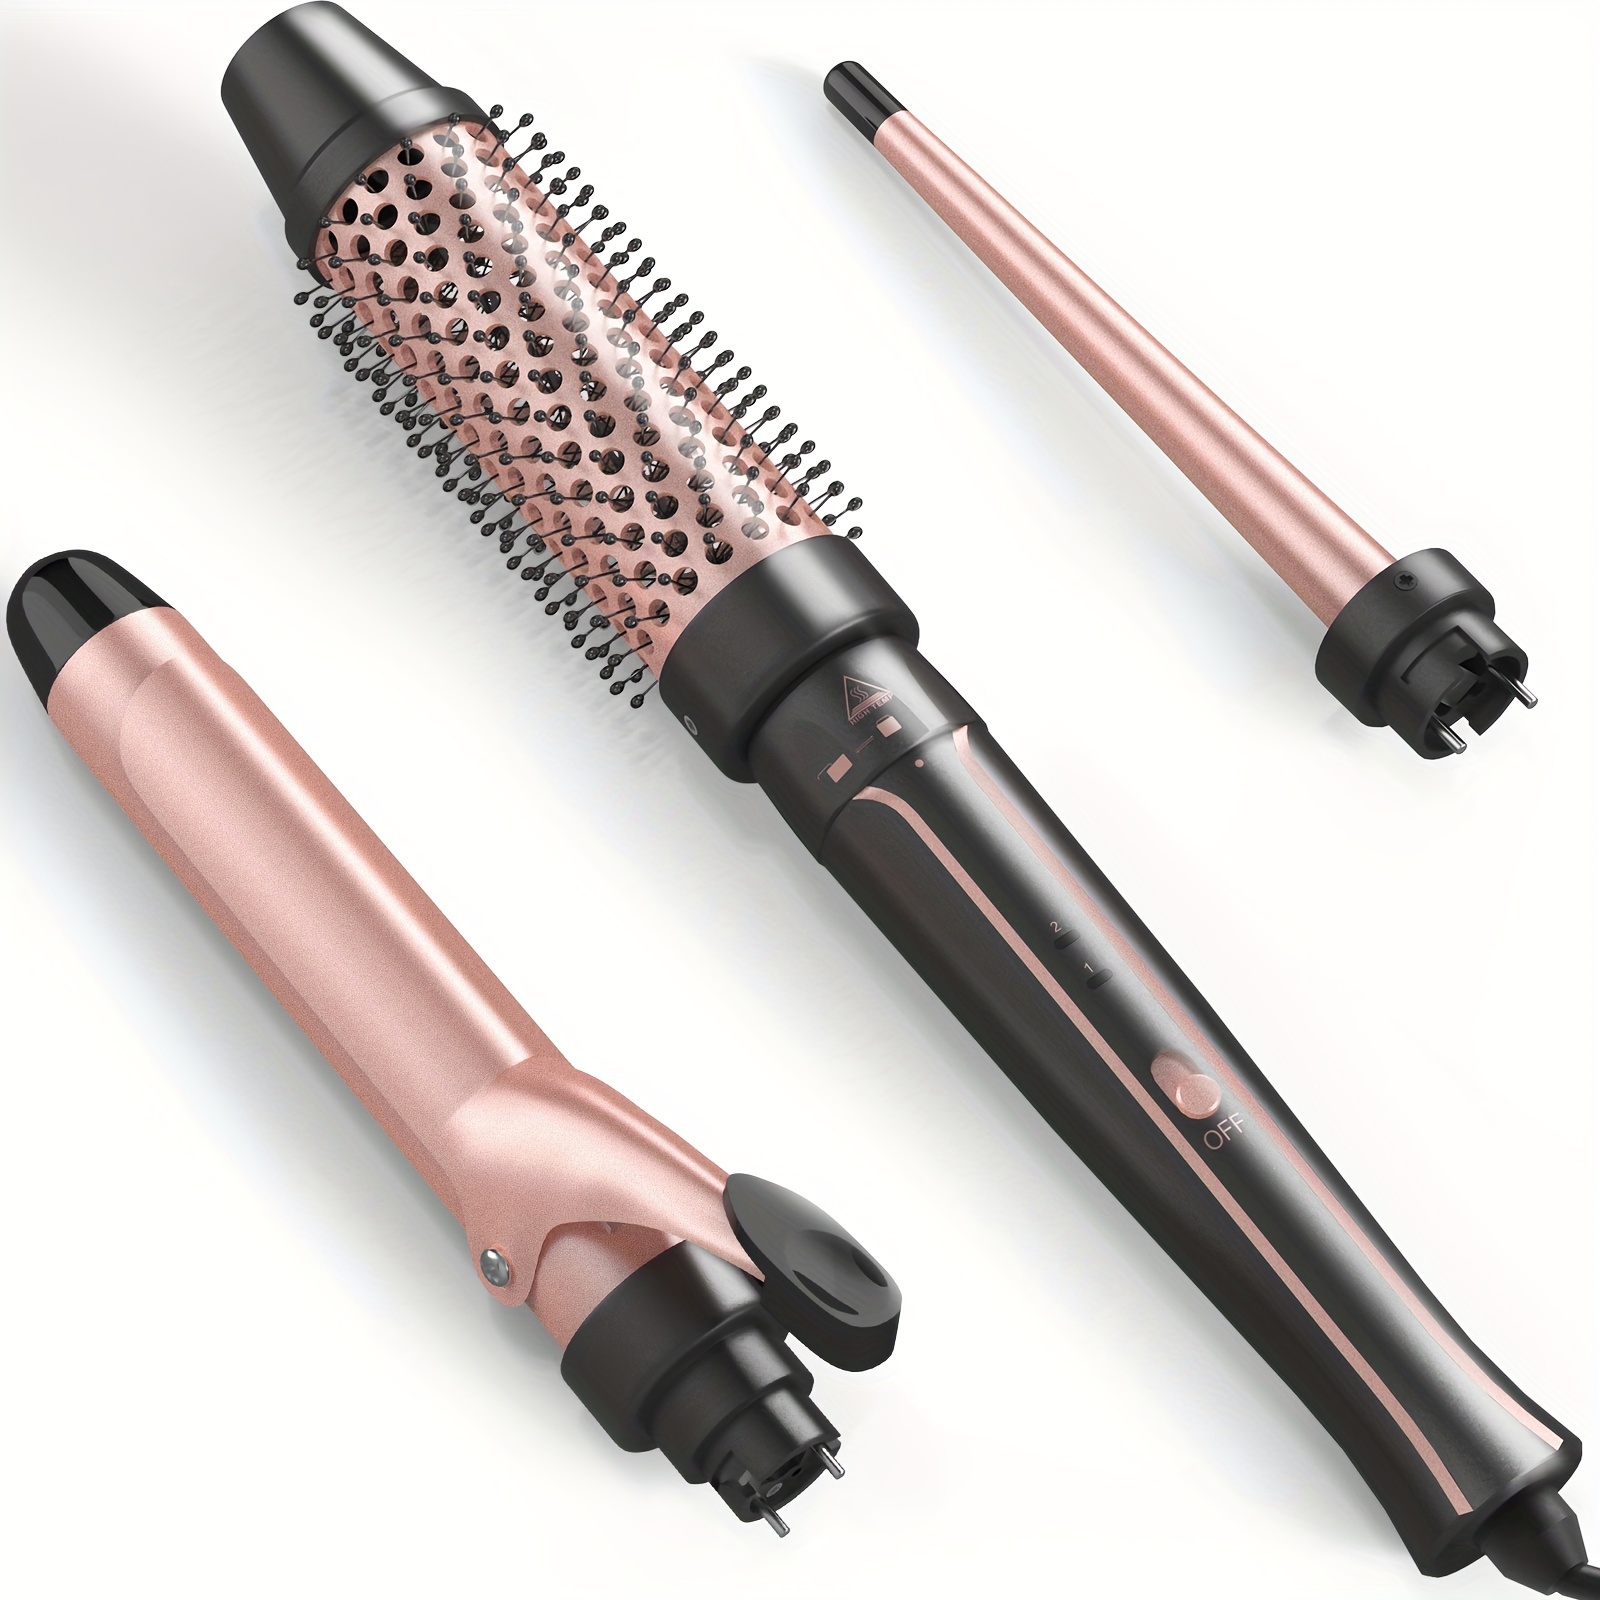 

Curling Iron Set With Thermal Brush Ceramic Curling Wand (0.35"-1"), 1 1/2 Inch Pro Heated Round Brush Create Blowout Look & Natural Curls, 30s Fast Heat Up, Detachable Dual Voltage Hair Curler